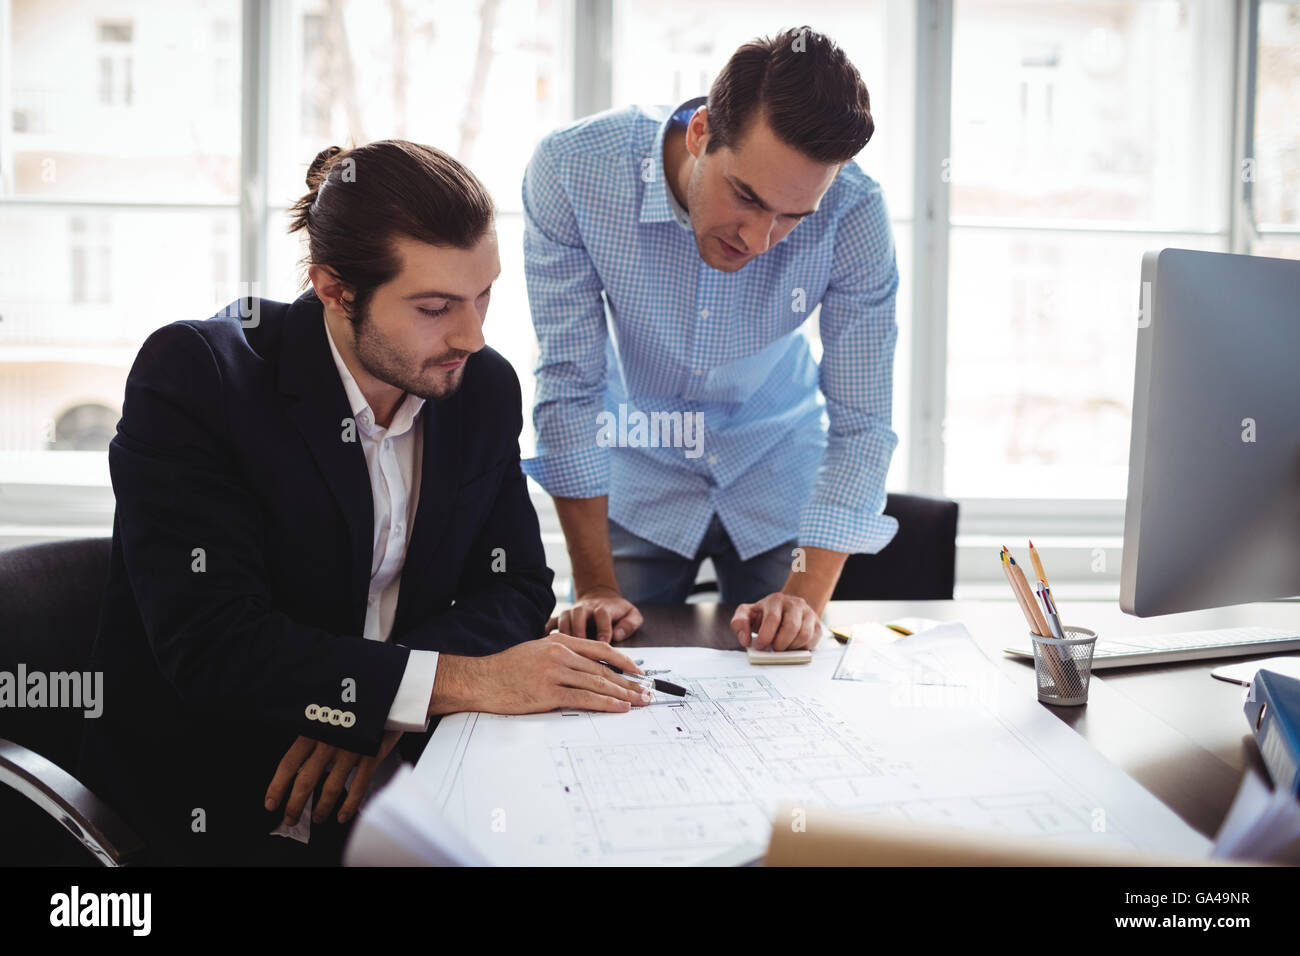 Interior designer with male colleague working in office Stock Photo